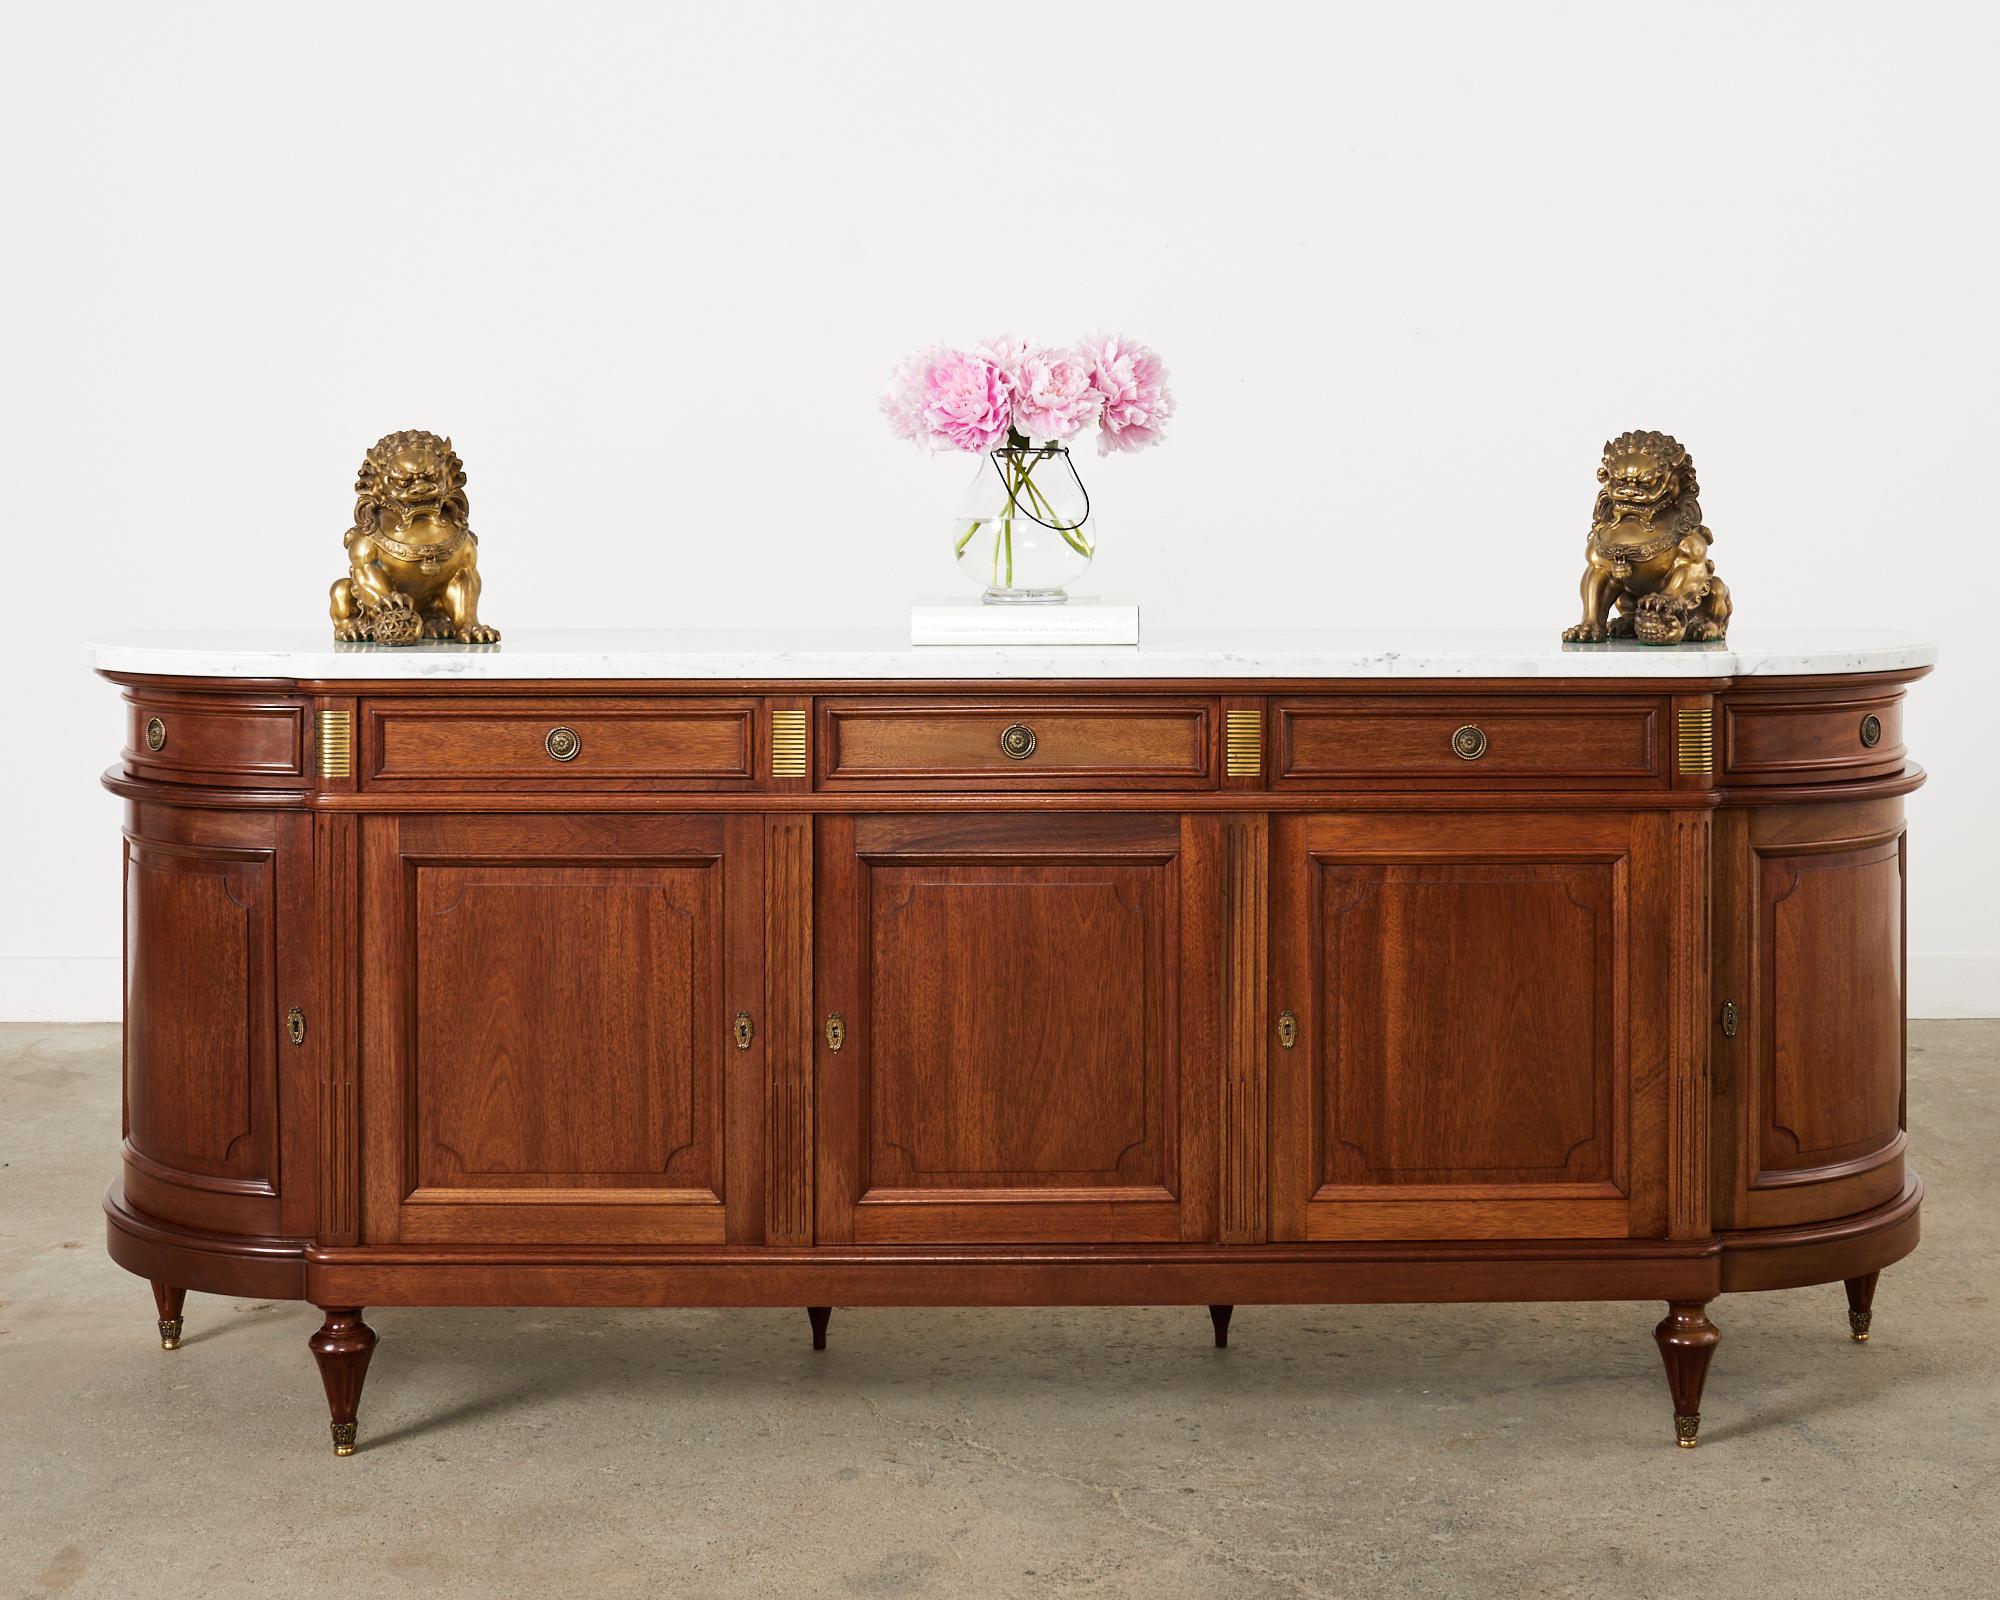 Grand French mahogany sideboard buffet or server featuring a massive Italian Carrara marble top. Beautifully crafted in the neoclassical Louis XVI taste by French artisan cabinet makers. The mahogany case has classic French curved demilune ends with